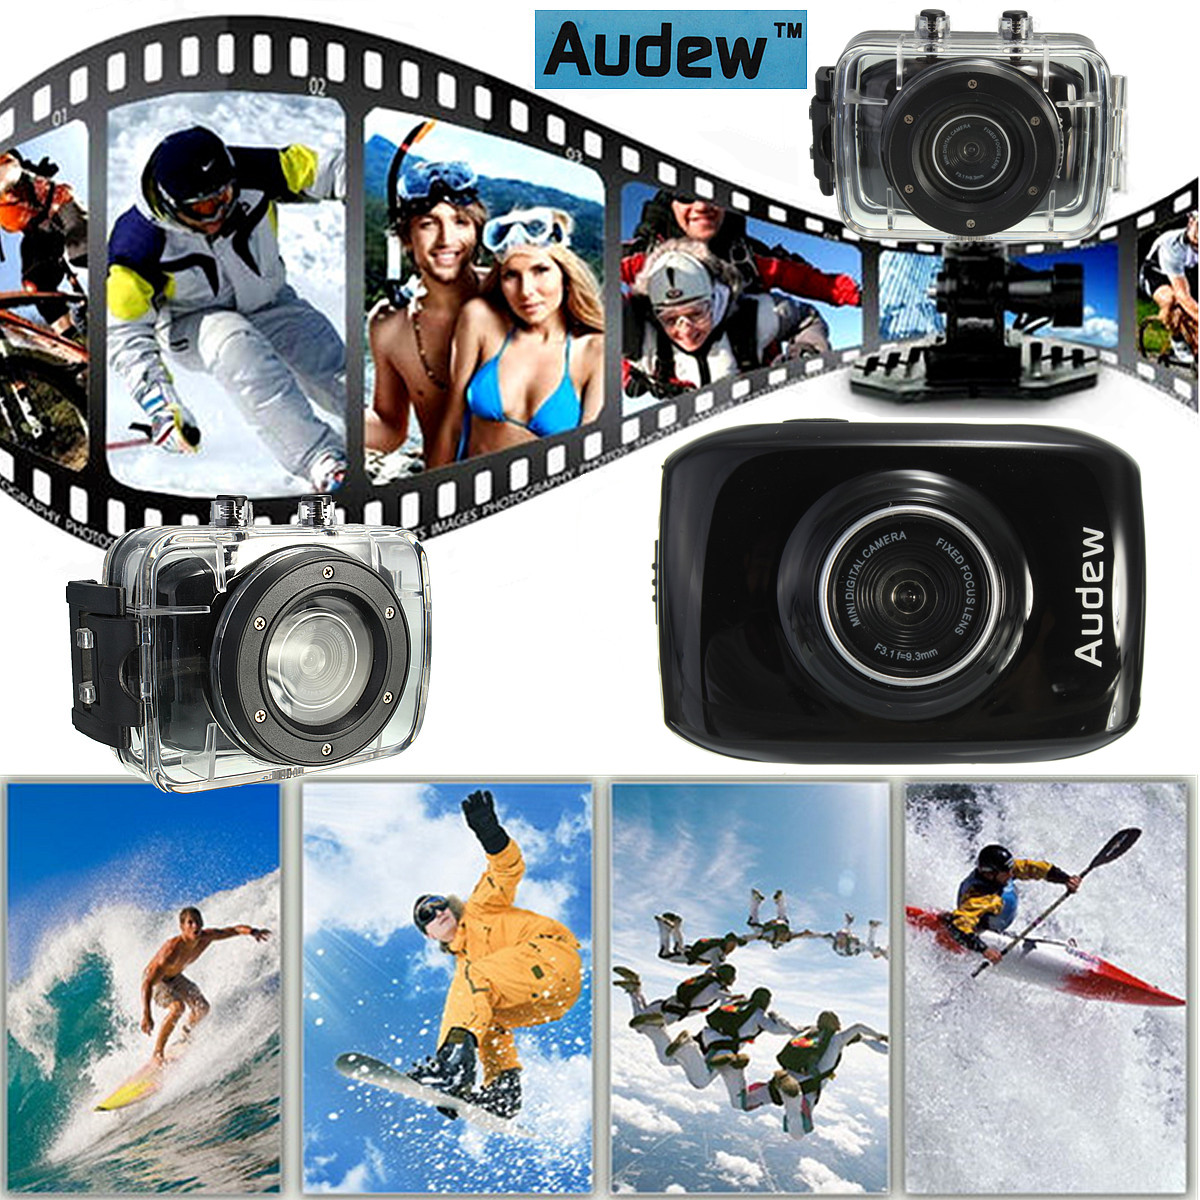 2-Inch-720P-HD-Touch-Screen-Portable-Waterproof-Mini-Action-Outdoor-Sport-Camera-DV-Camcorder-1336787-2